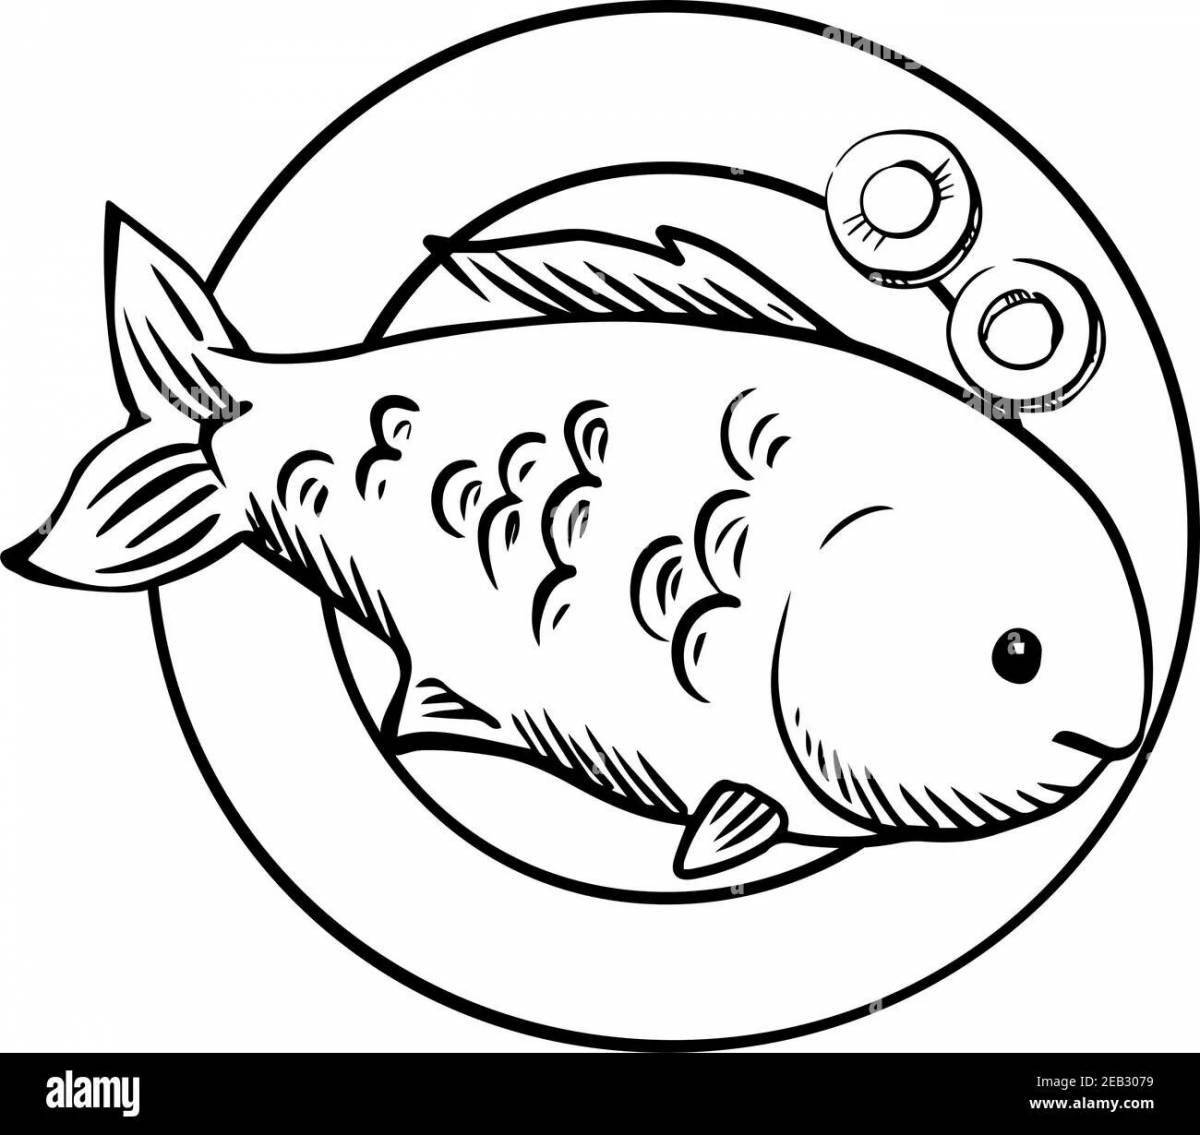 Colorful fried fish coloring page